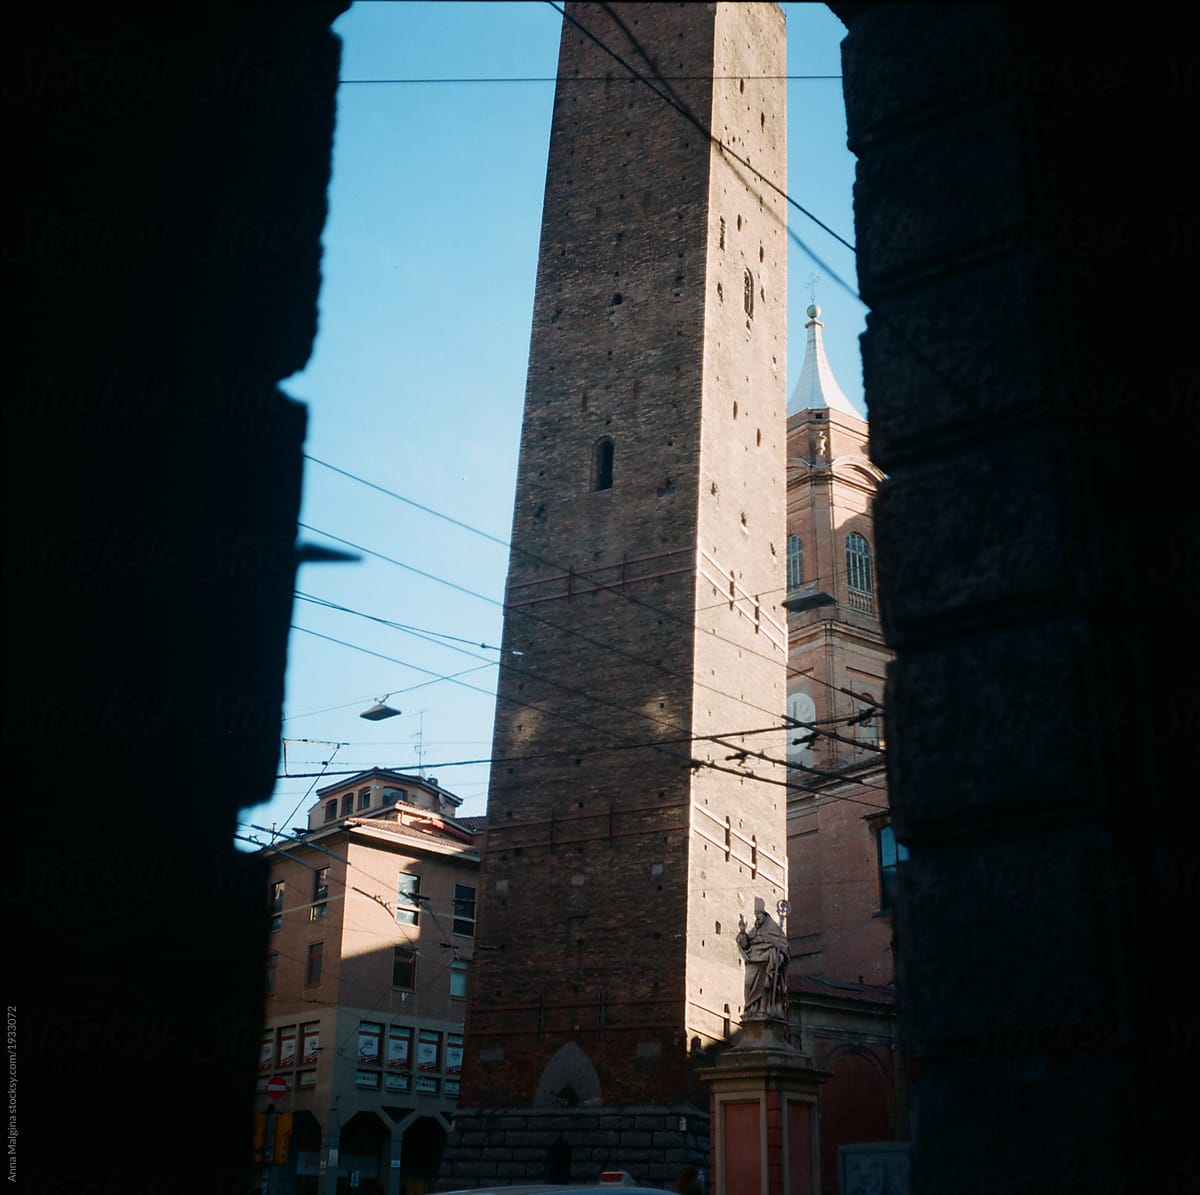 Bologna tower in winter